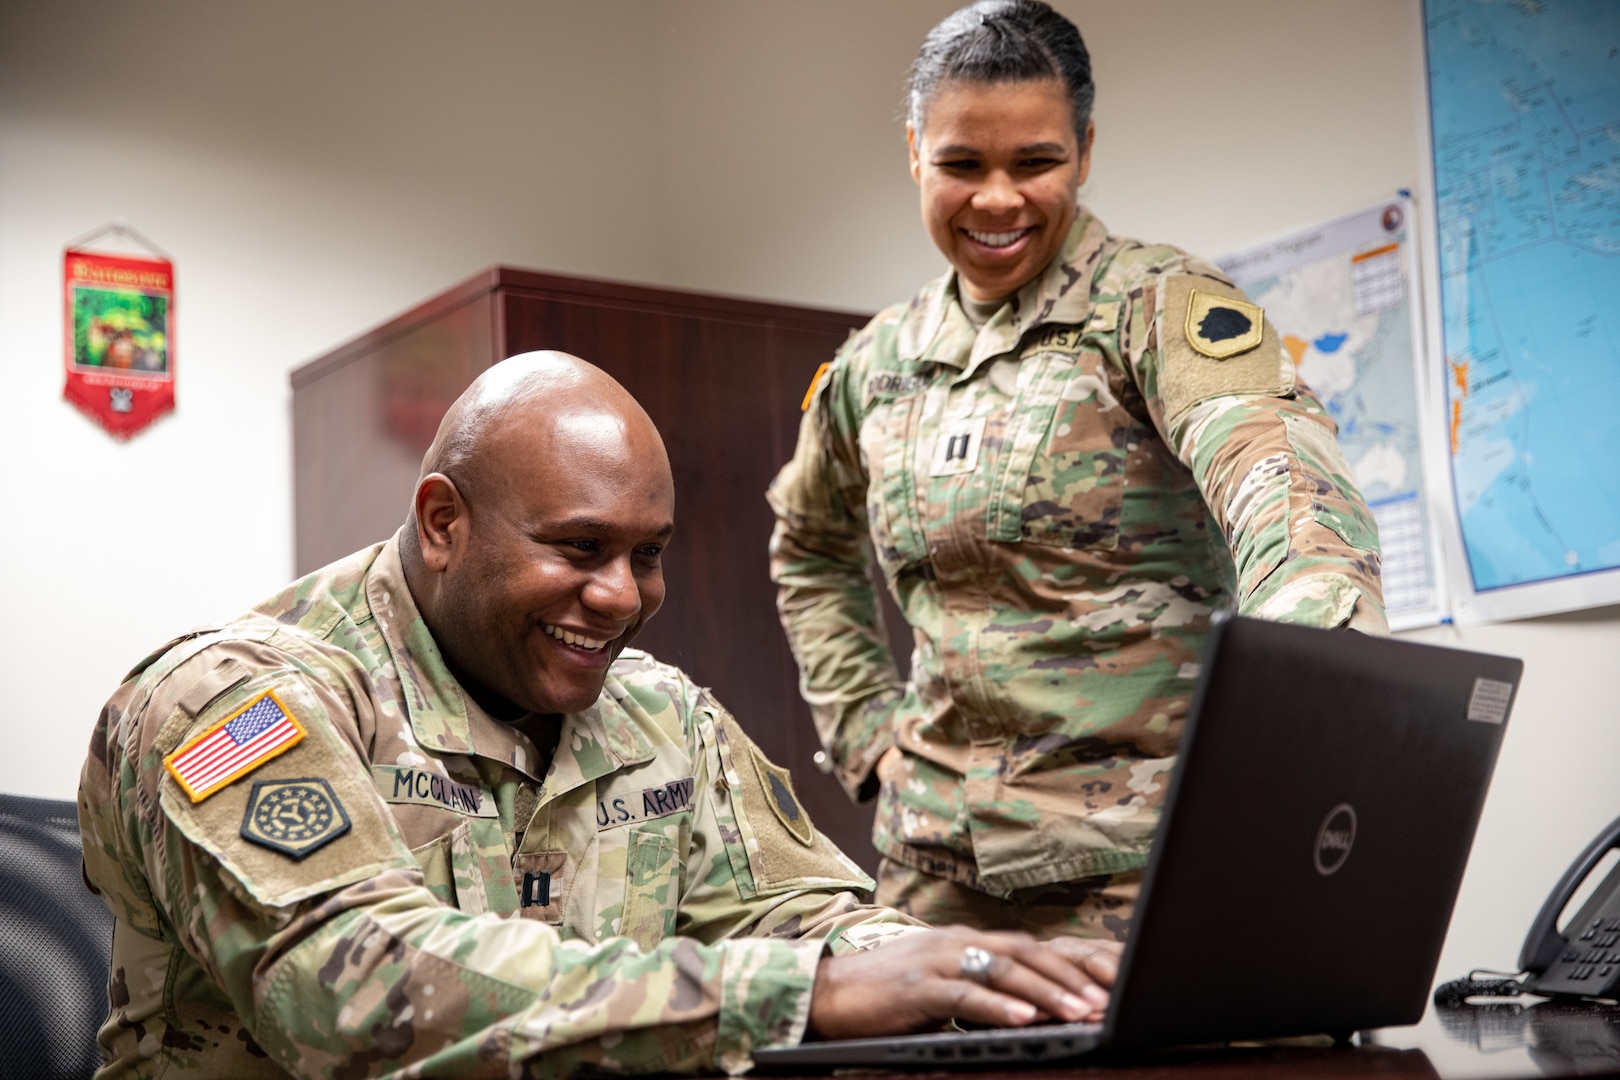 Capt. Anthony McClain, the Illinois National Guard Director of Diversity and Inclusion, chats with Capt. Crystal Rodrigues, the State Partnership Program Director and International Affairs Officer, in their office at the Illinois National Guard Joint Force Headquarters on Camp Lincoln in Springfield, Ill Dec. 29, 2022. (U.S. Army photo by Sgt. Trenton Fouche, Joint Force Headquarters - Illinois National Guard)